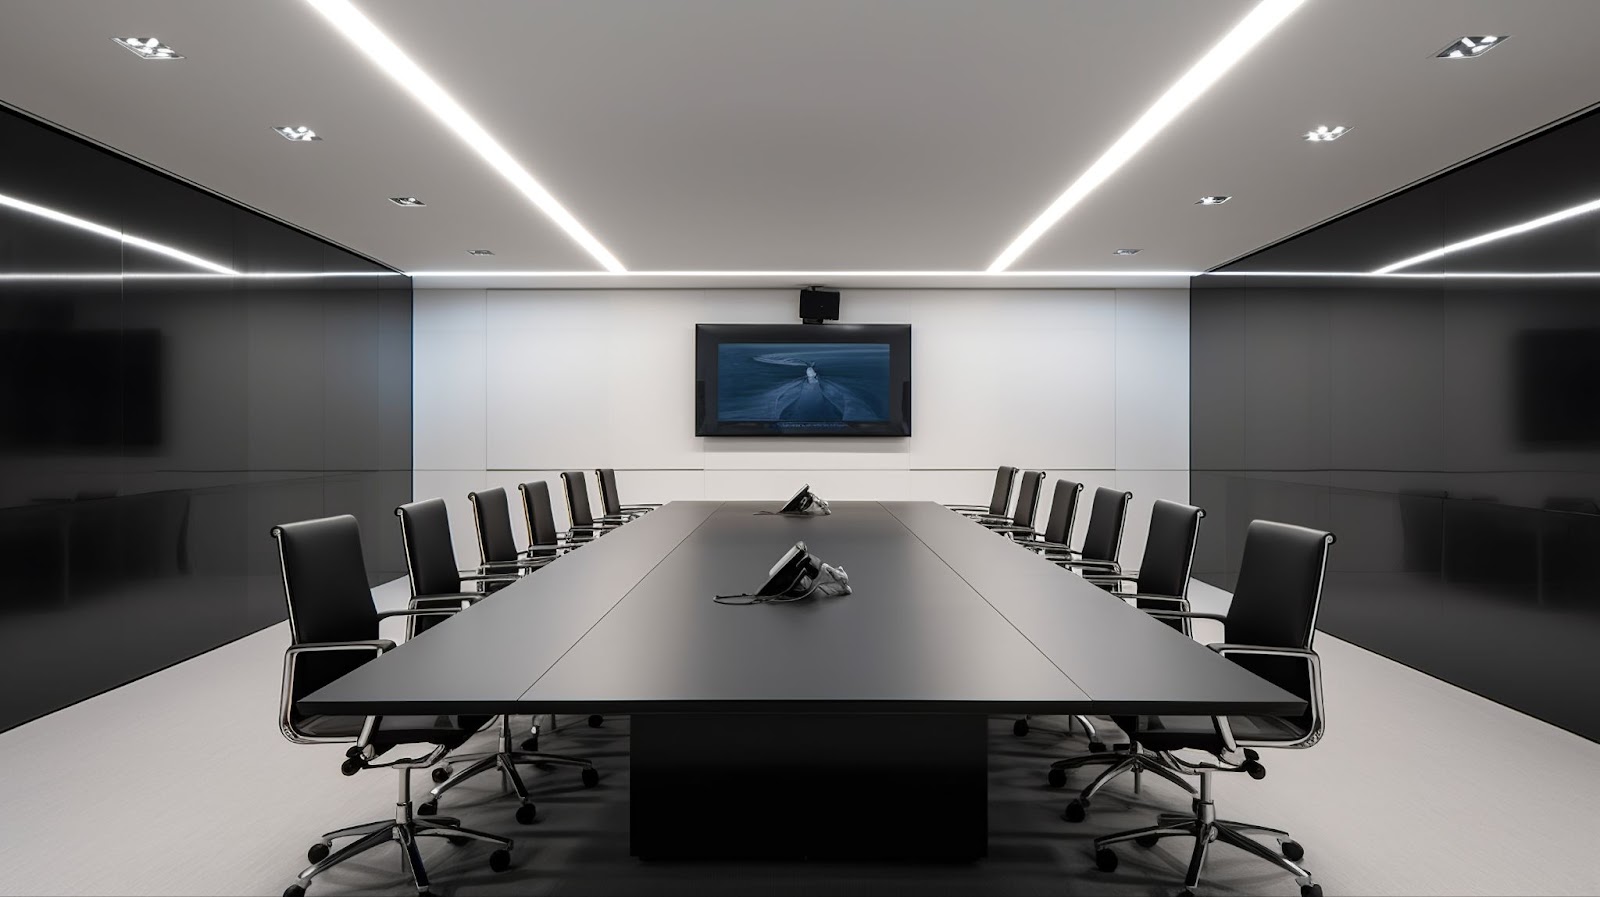 A well-lit conference room with many lights.